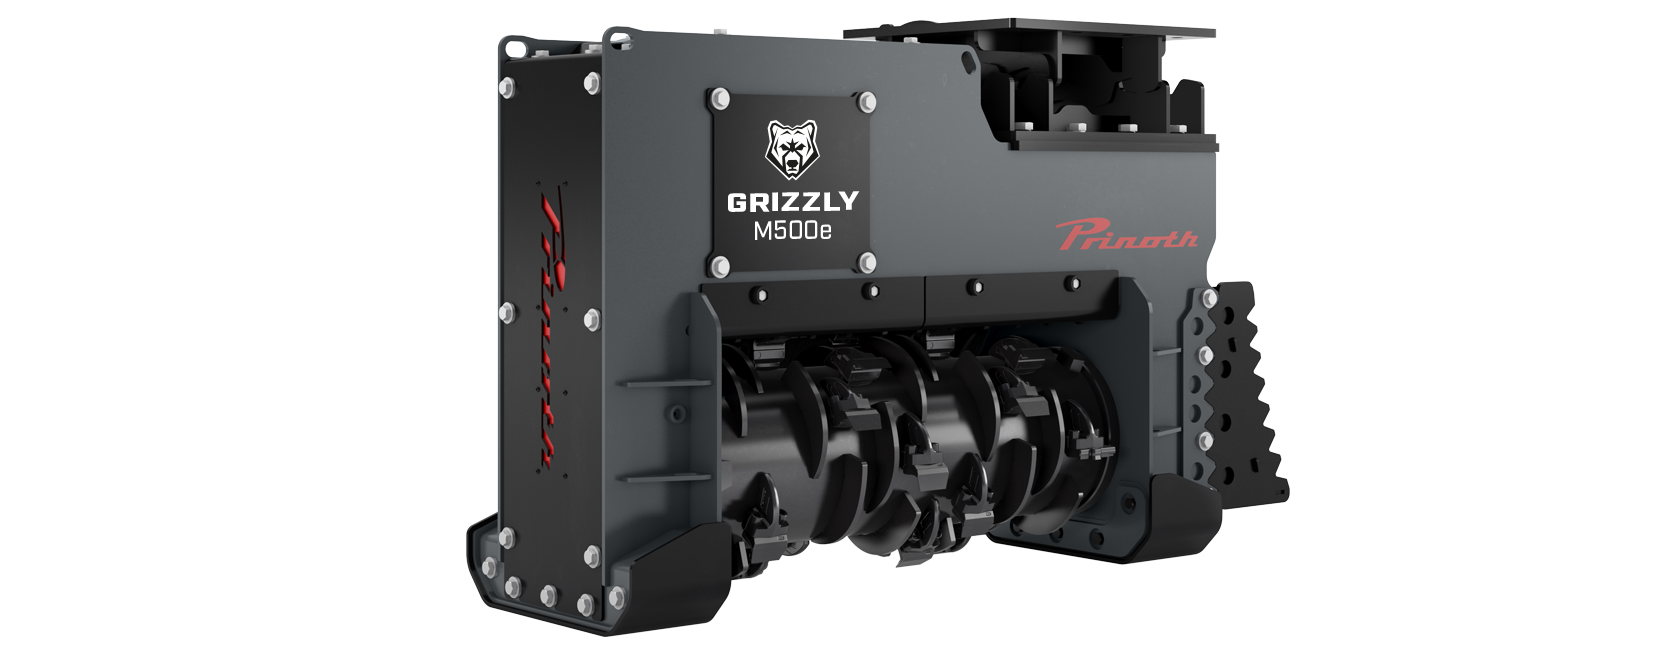 GRIZZLY M500e